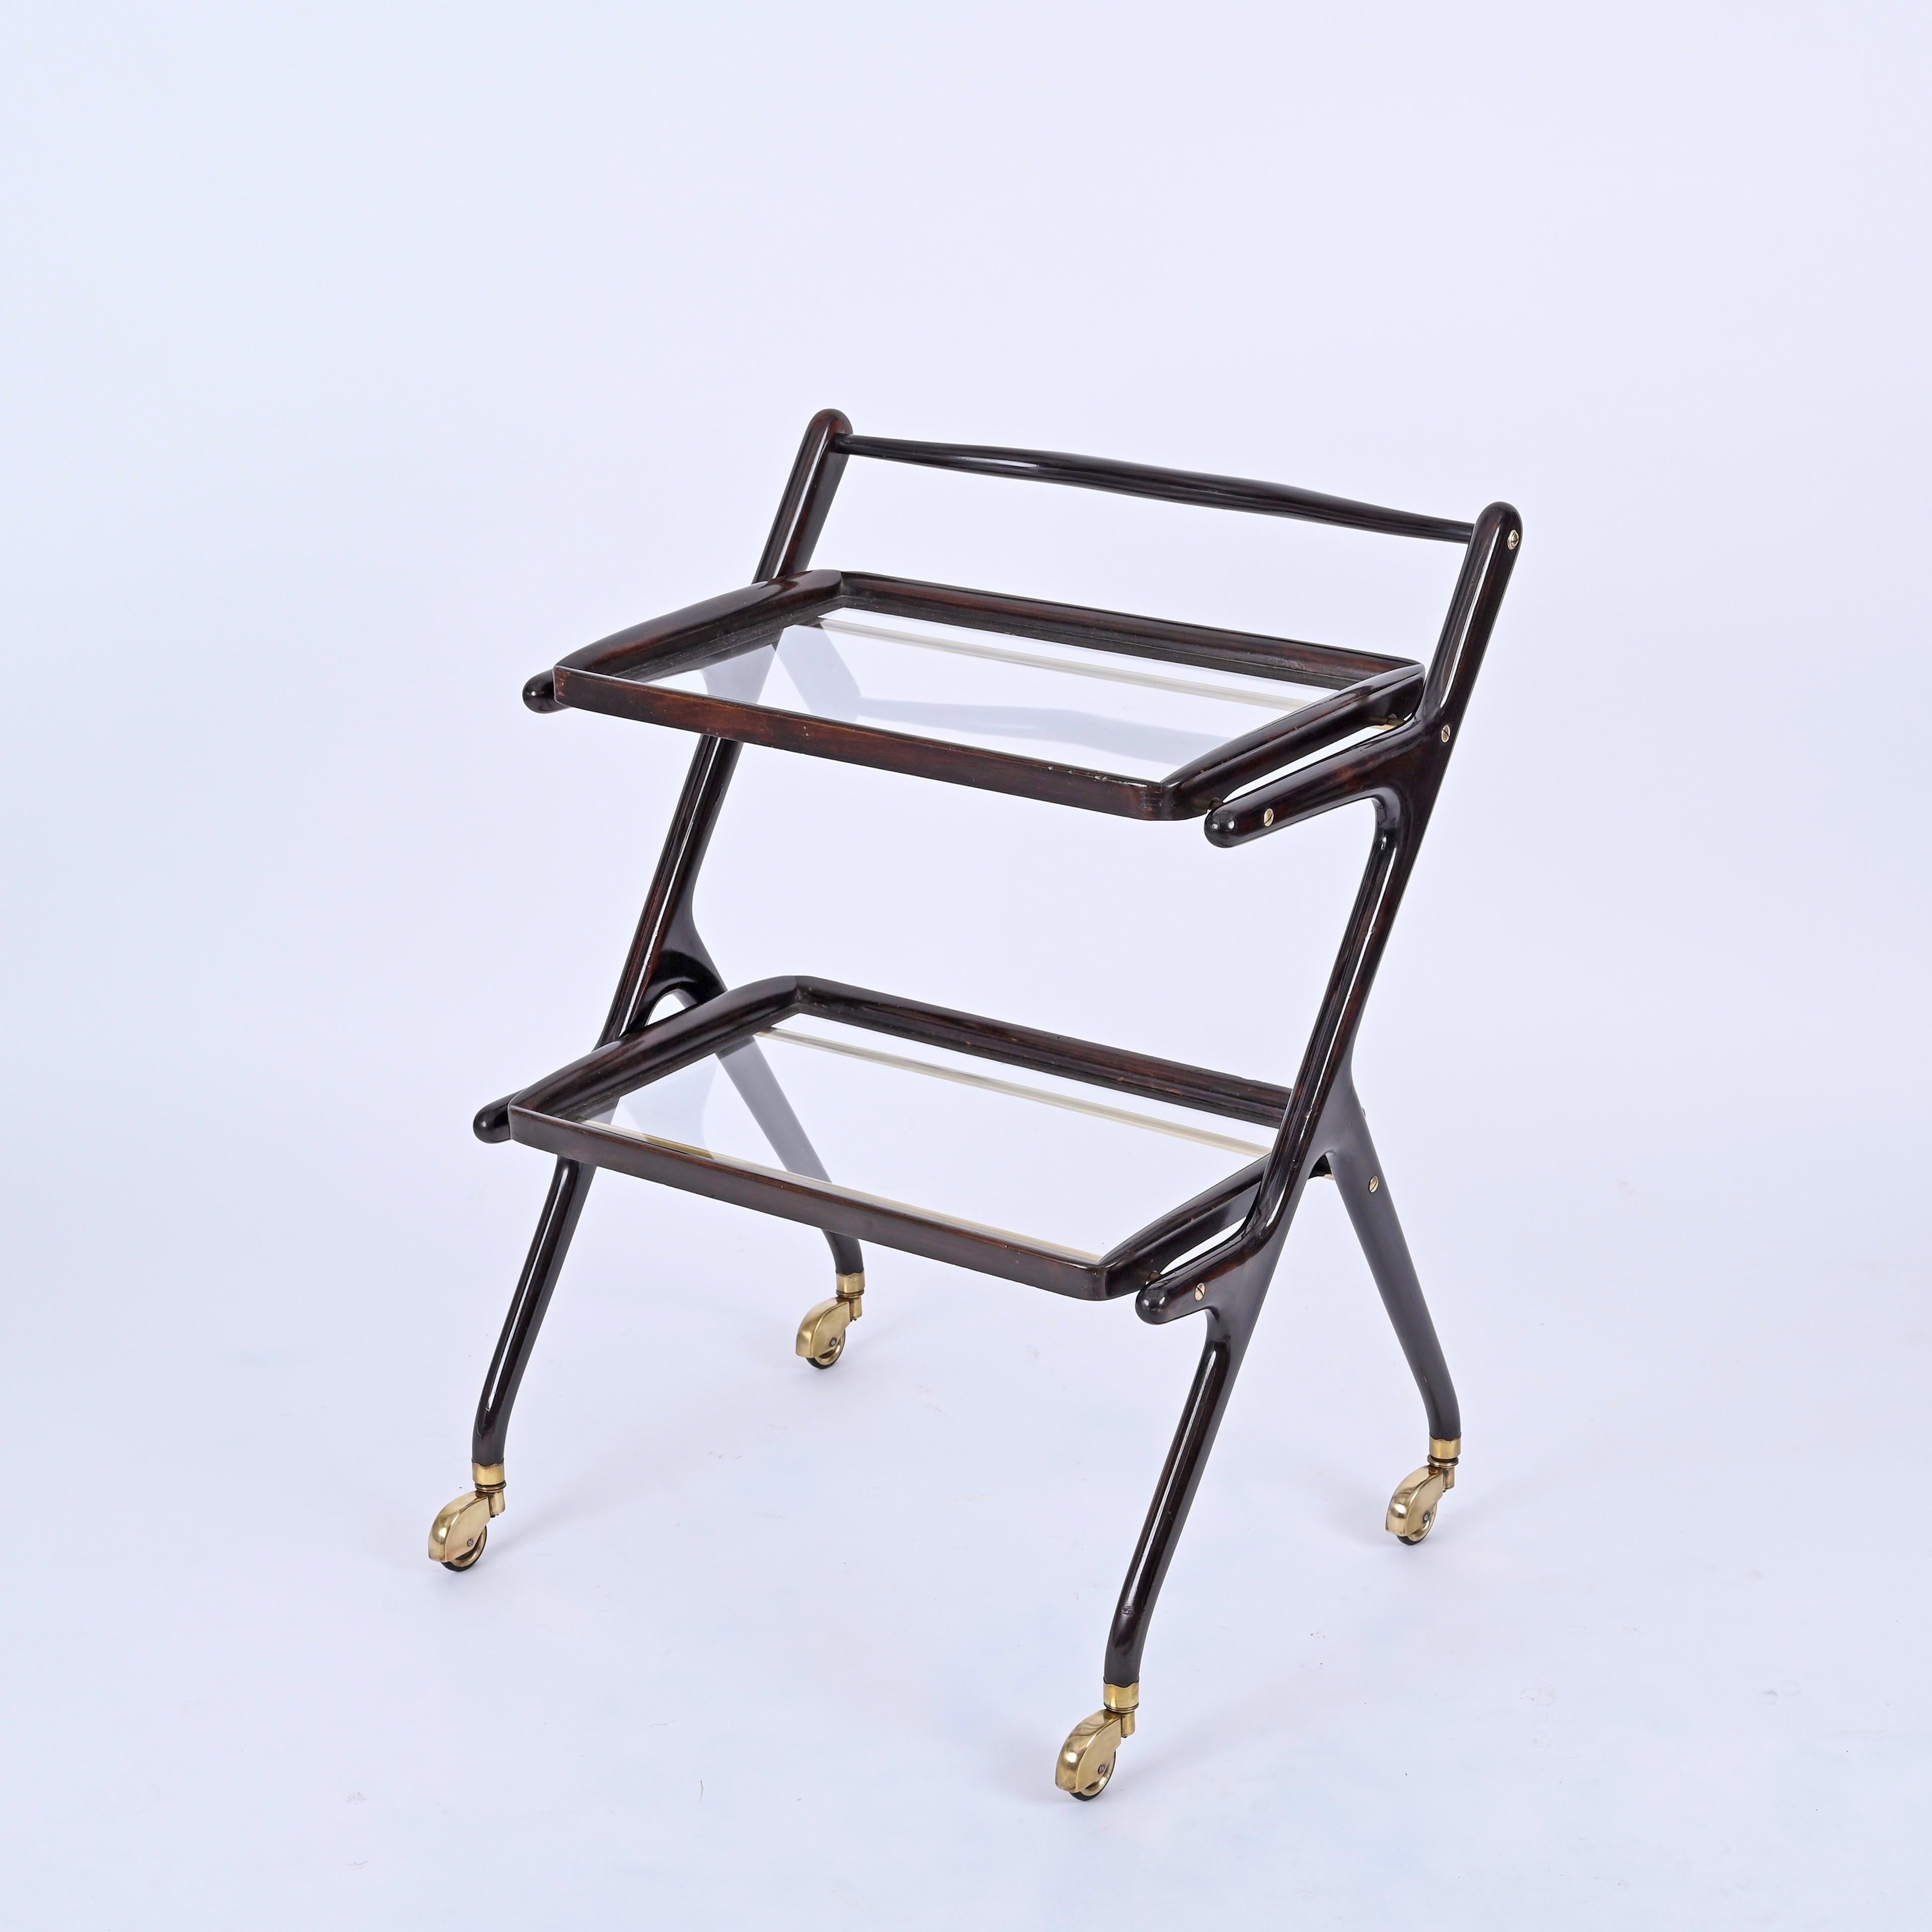 Gorgeous midcentury bar cart in wood and brass with two removable crystal glass trays.  This wonderful object designed by Cesare Lacca in Italy during 1950s.

This structure of this serving table is fully made in a wonderful stained walnut with